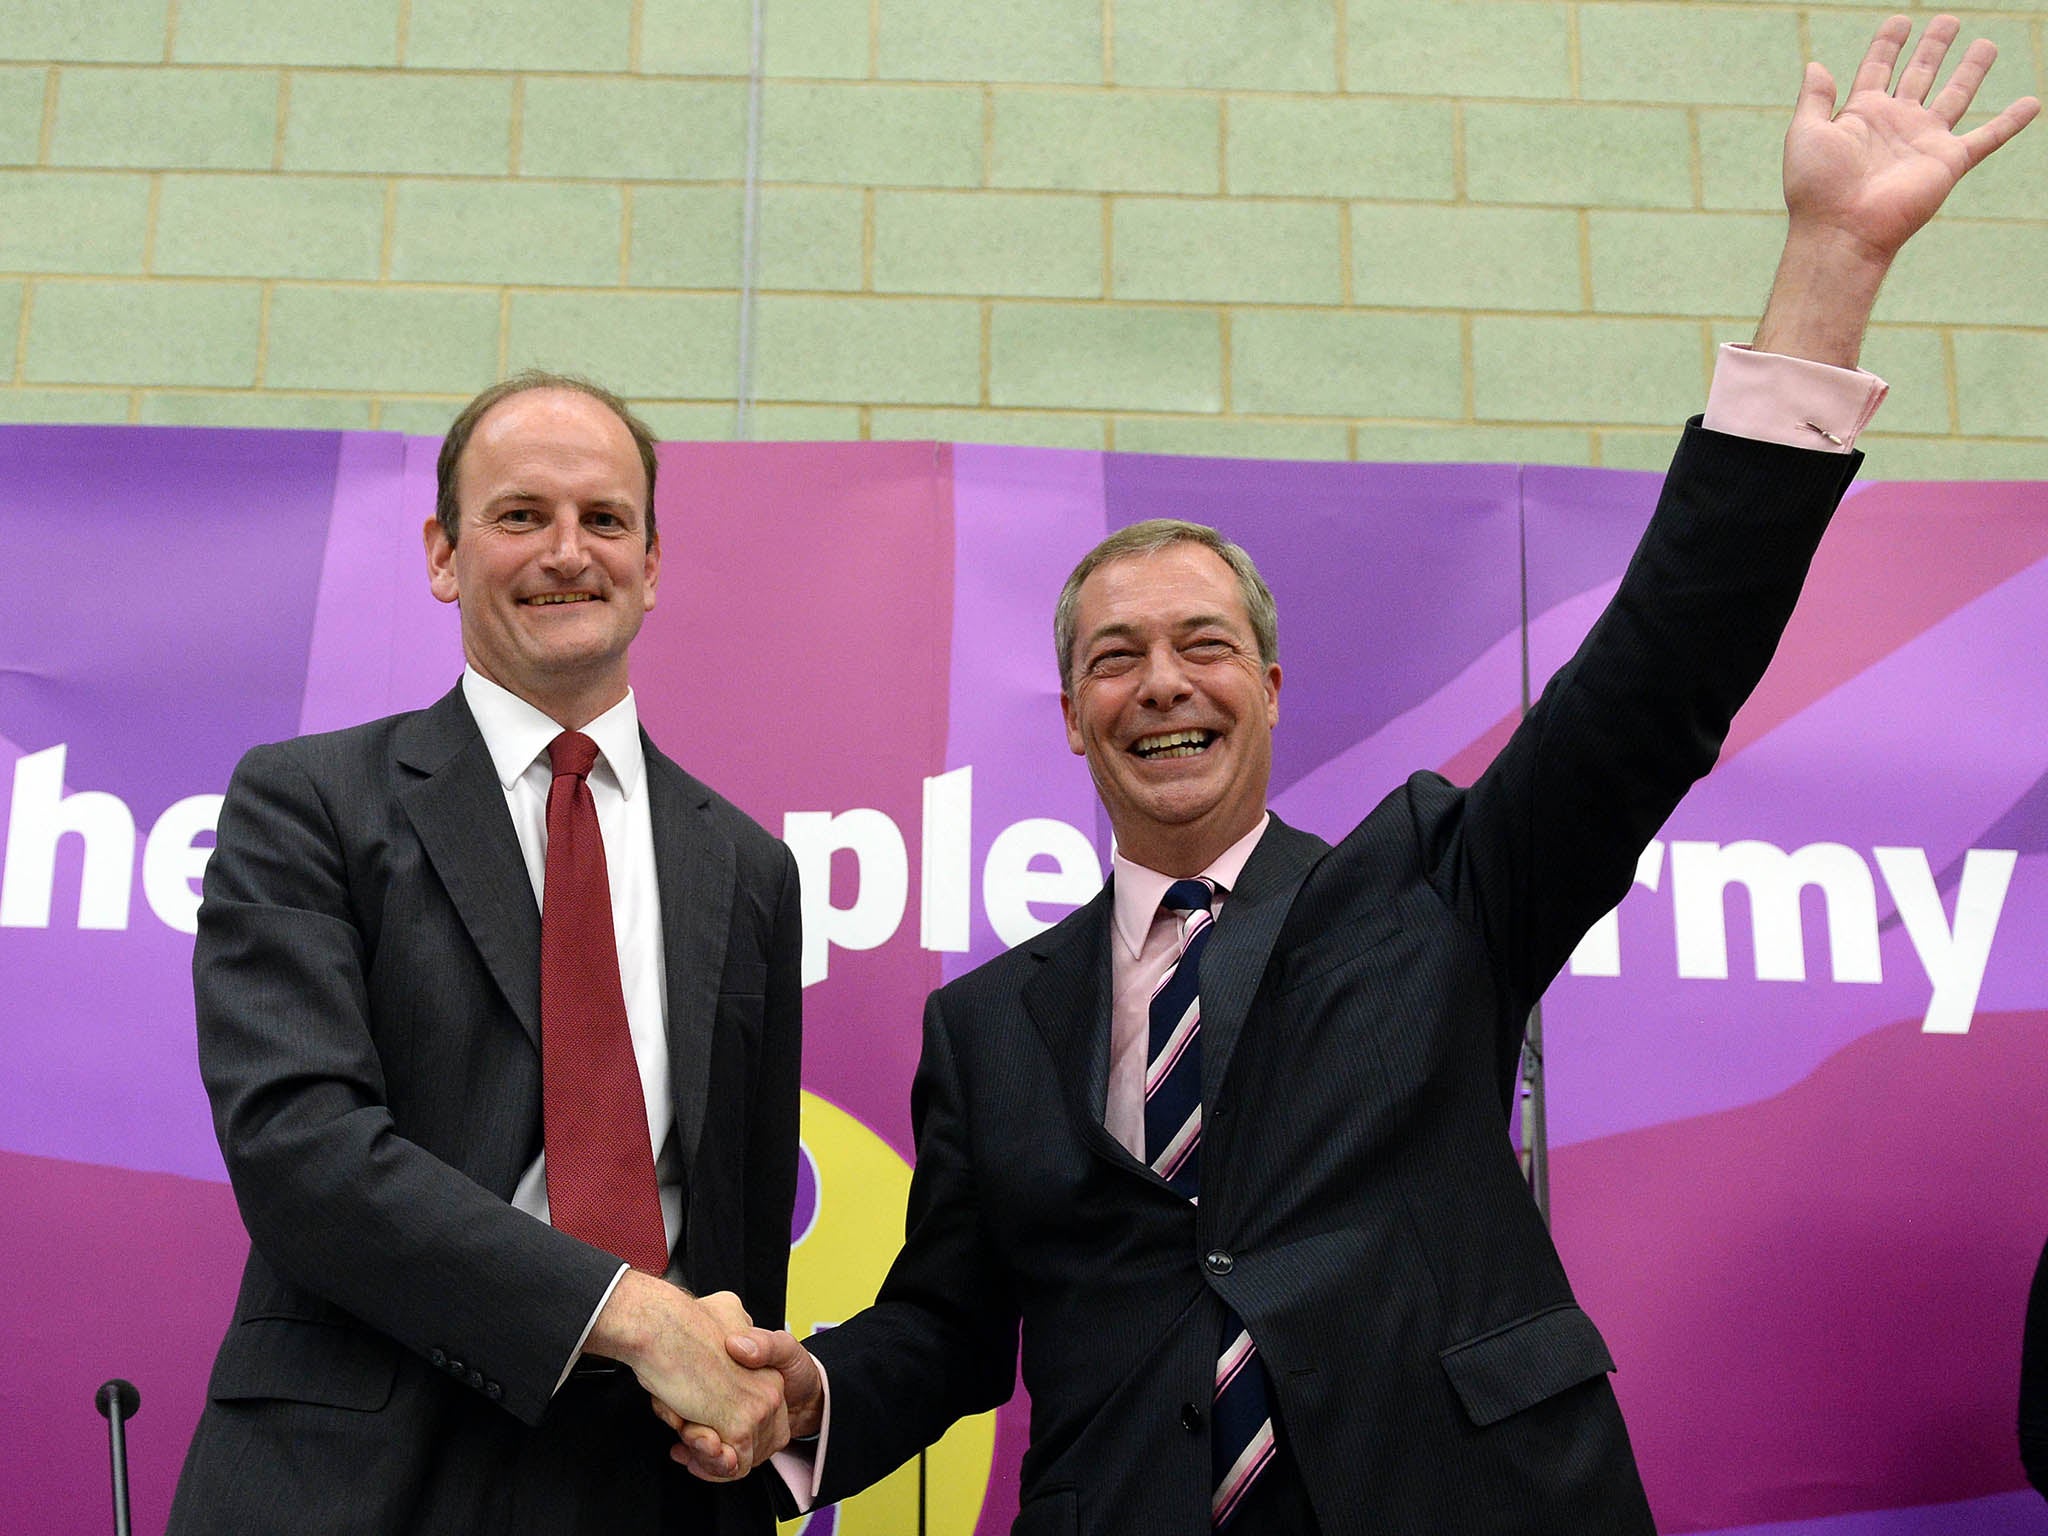 The relationship between Douglas Carswell and Nigel Farage (l-r) has soured since the former's defection from the Conservatives